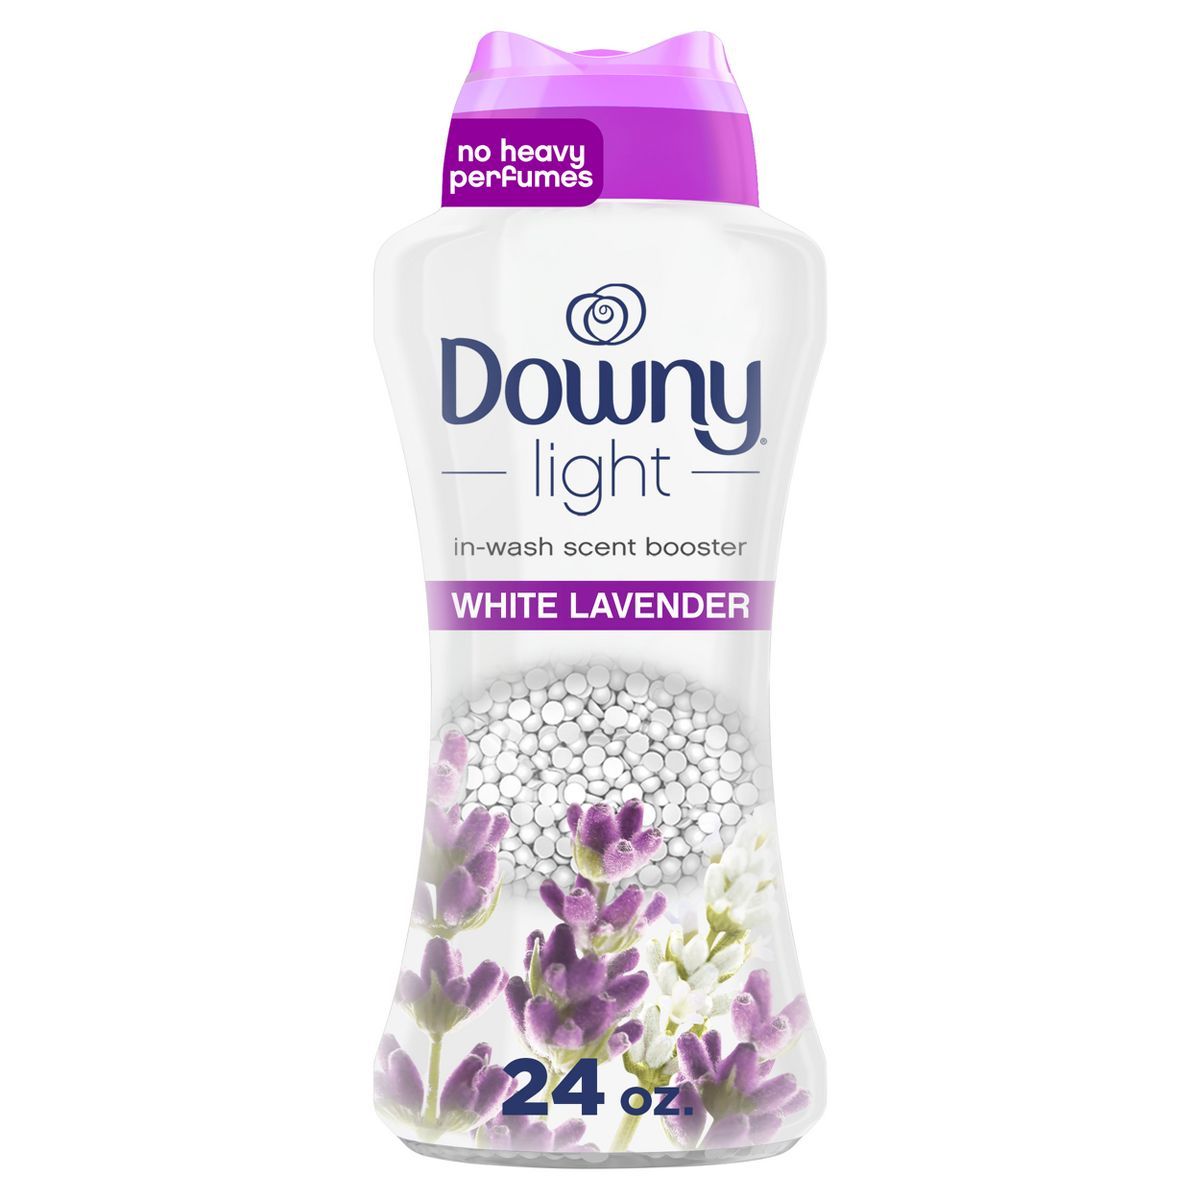 Downy Light White Lavender Laundry Scent Booster Beads for Washer with No Heavy Perfumes | Target